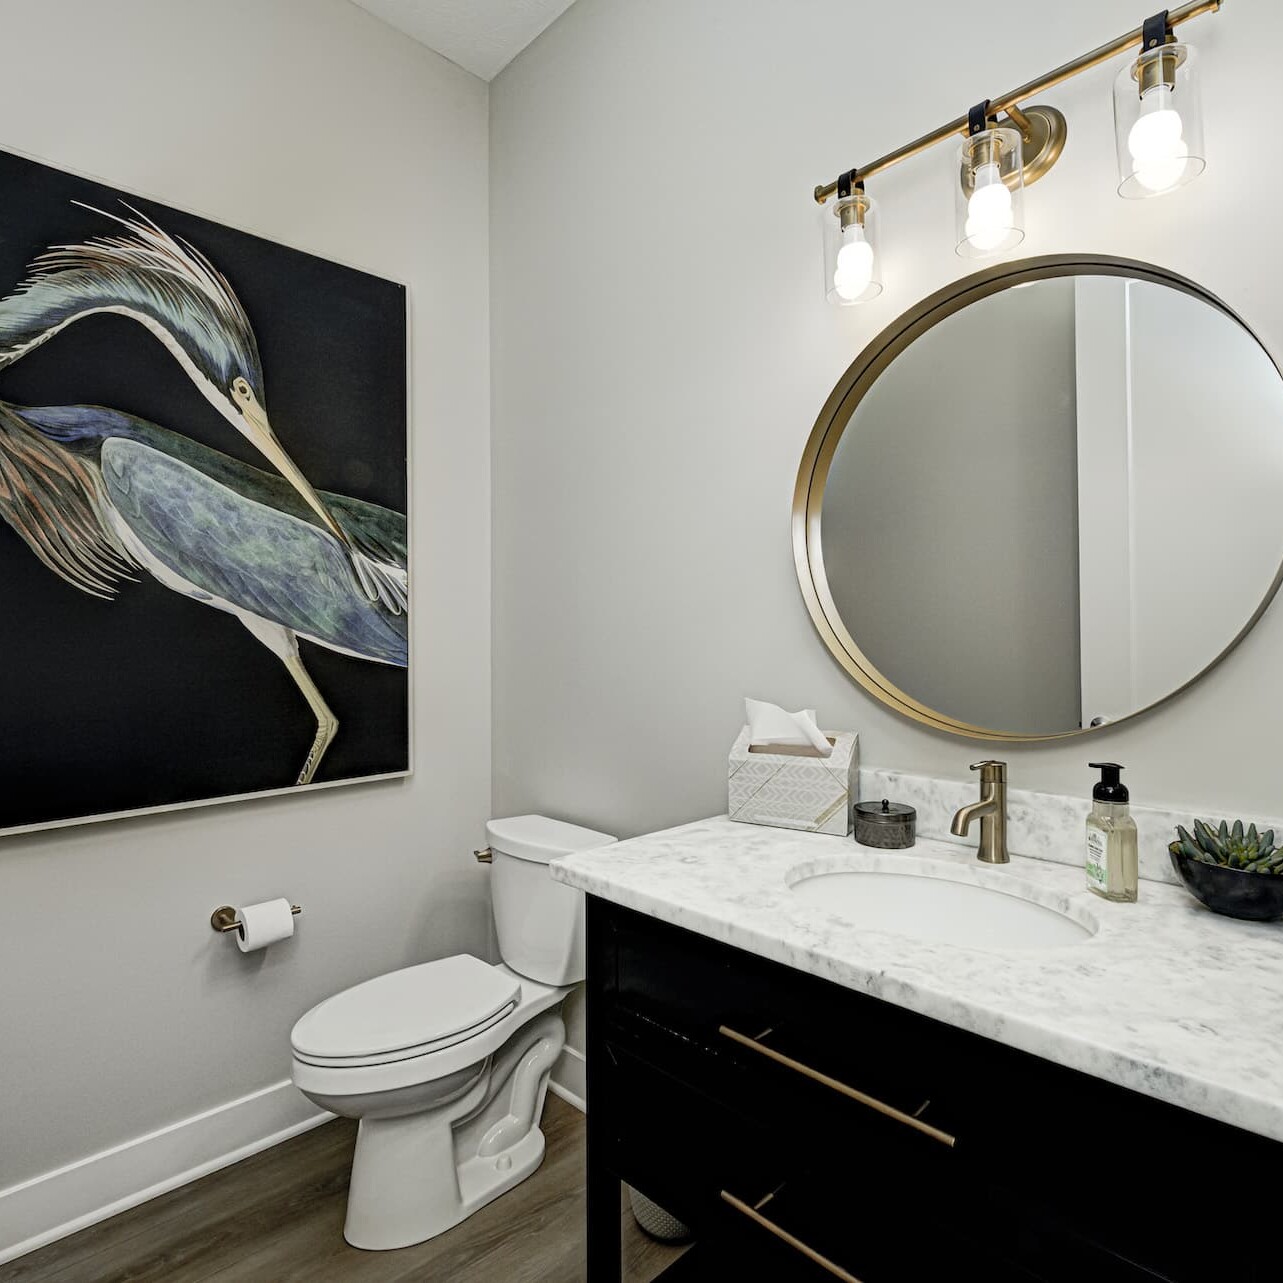 A black and gold bathroom with a painting on the wall, created by a Custom Home Builder in Carmel Indiana.